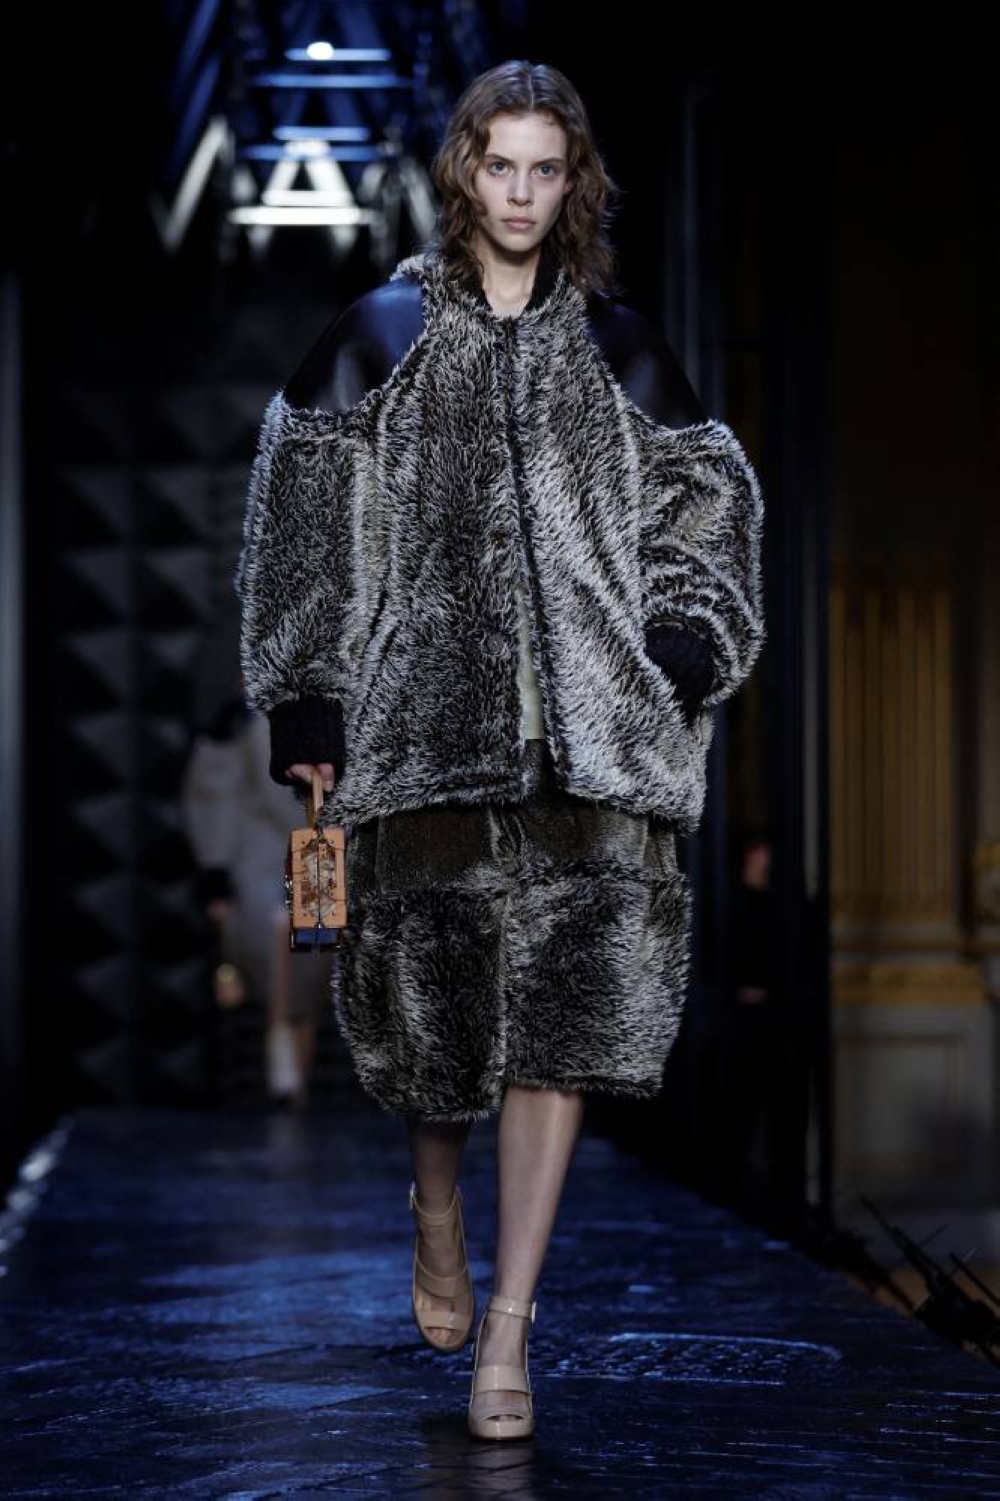 The Fiji Times » Louis Vuitton shows playful, French styles at